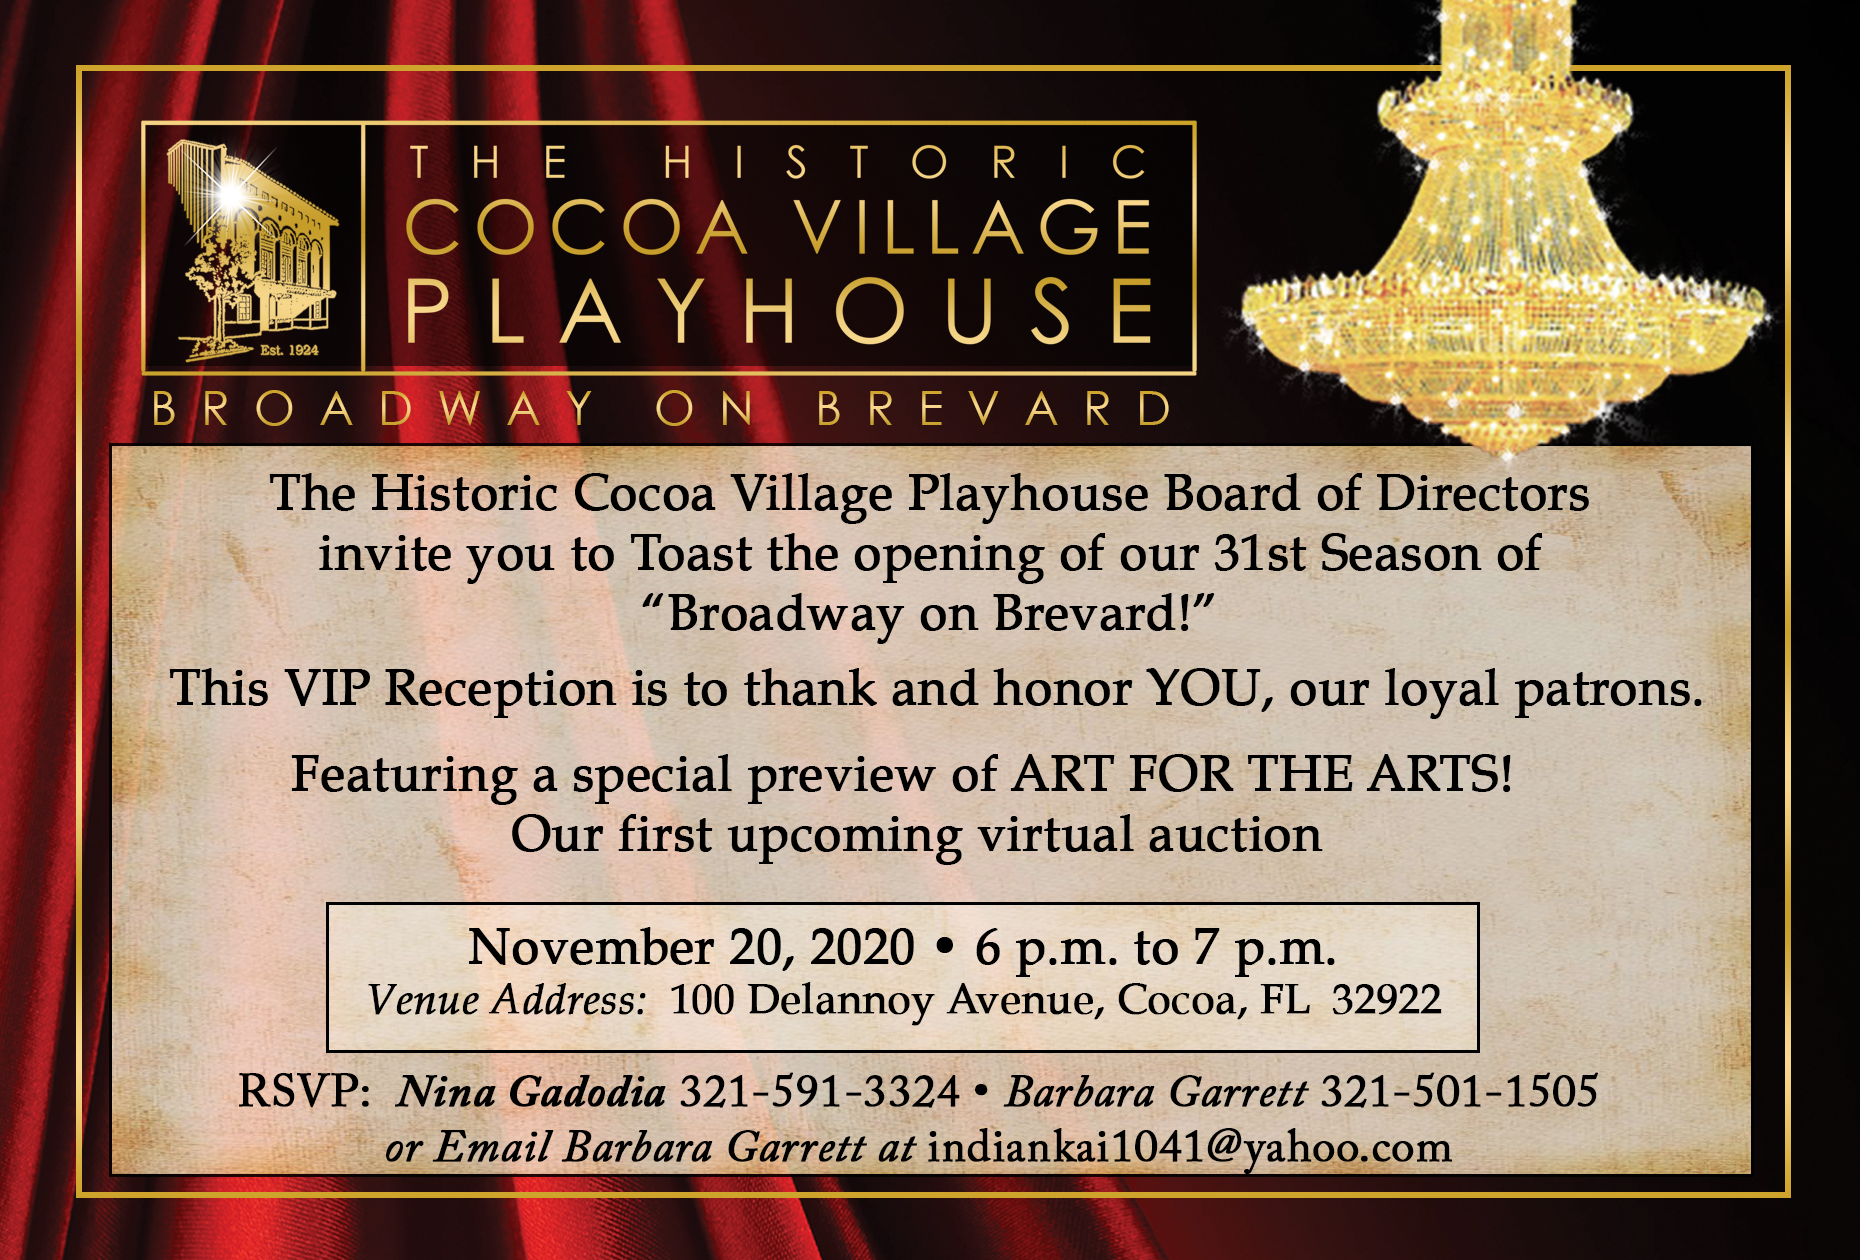 Toast the Opening of the 31st Season The Historic Cocoa Village Playhouse